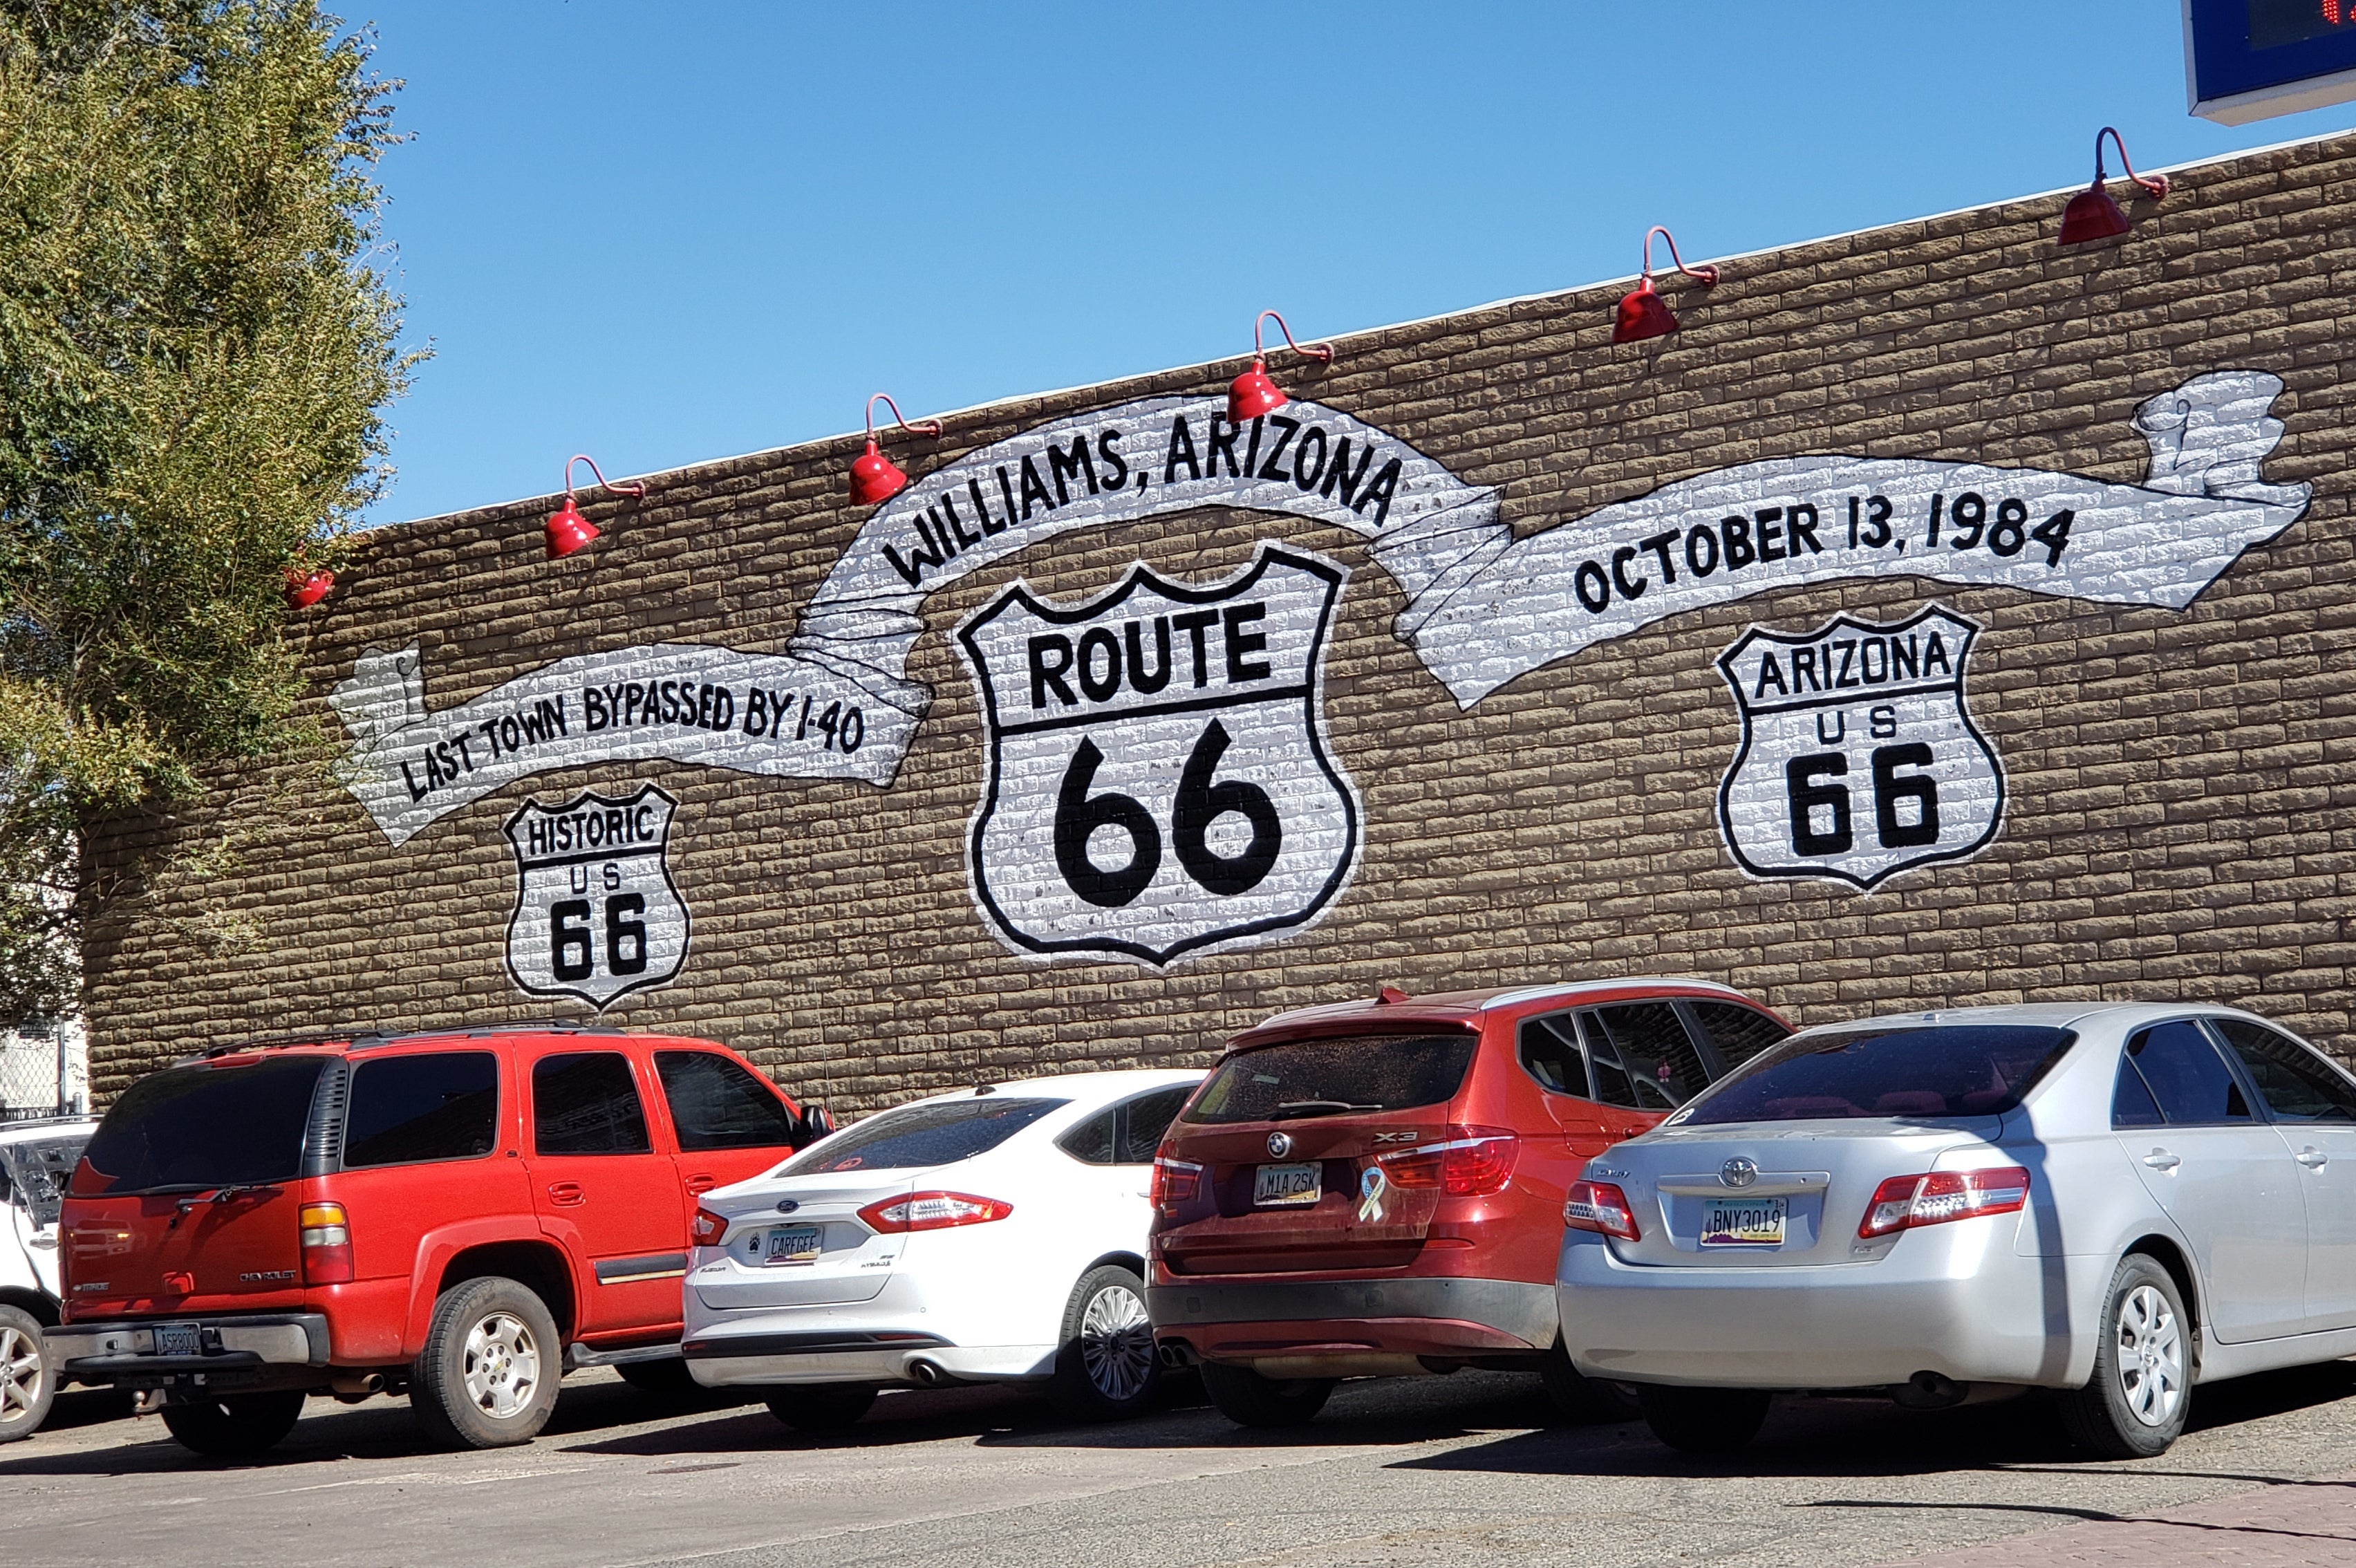 Well-maintained Williams is a period town on Route 66